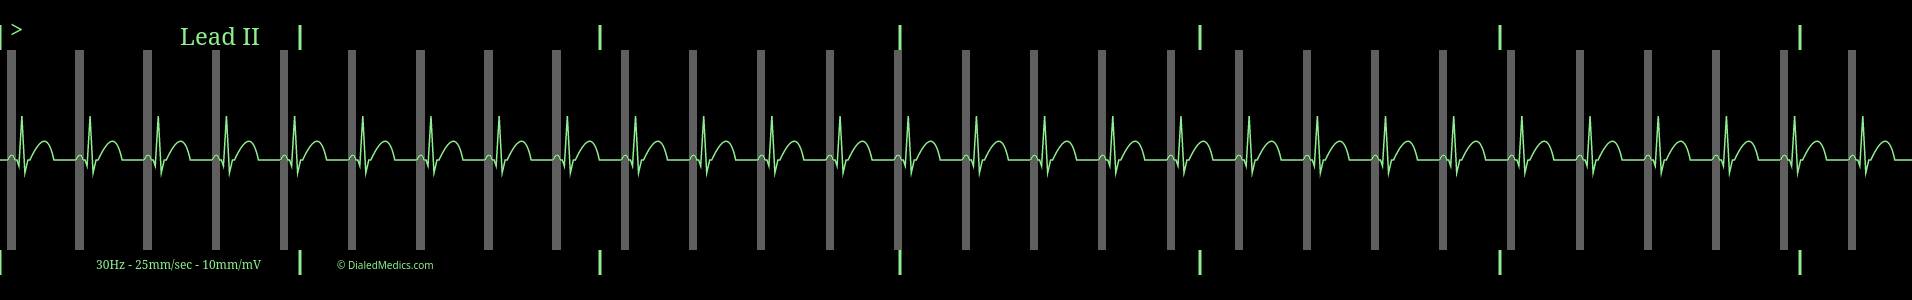 EKG monitor screen capture of Regular Sinus Rhythm with highlighted P waves and a HR of 65.